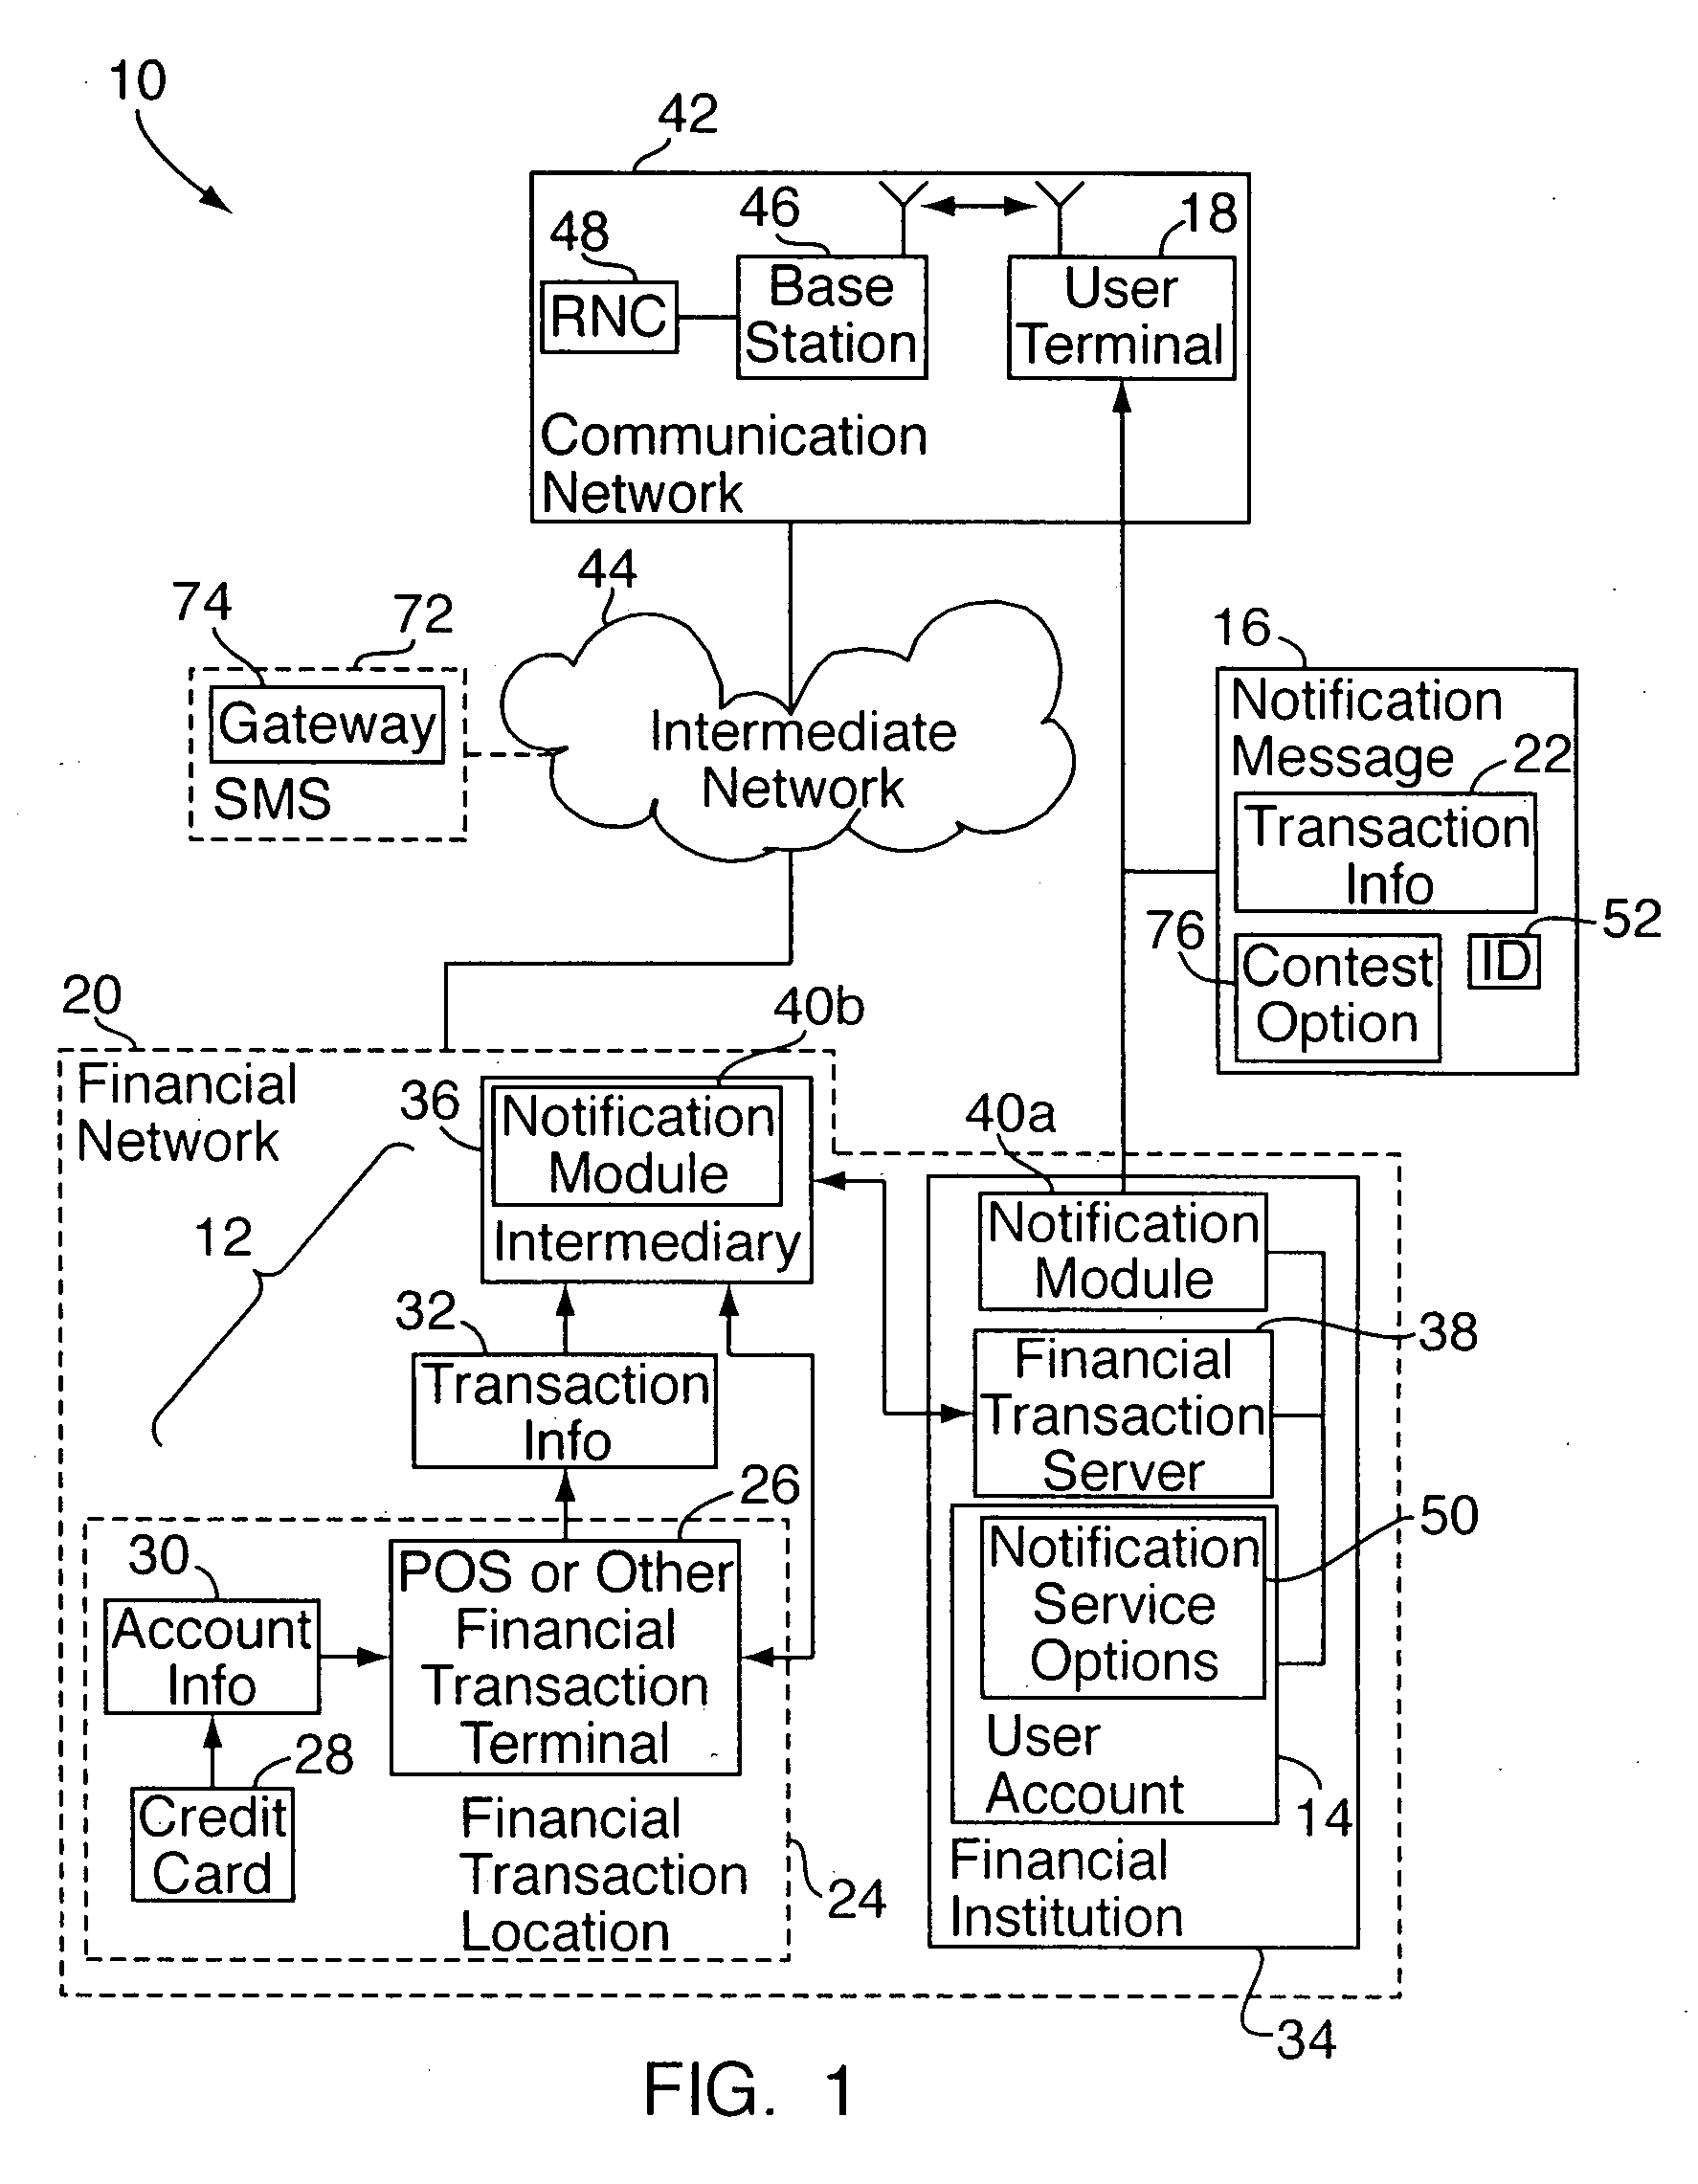 System for automatic financial transaction notifications over wireless network or other network